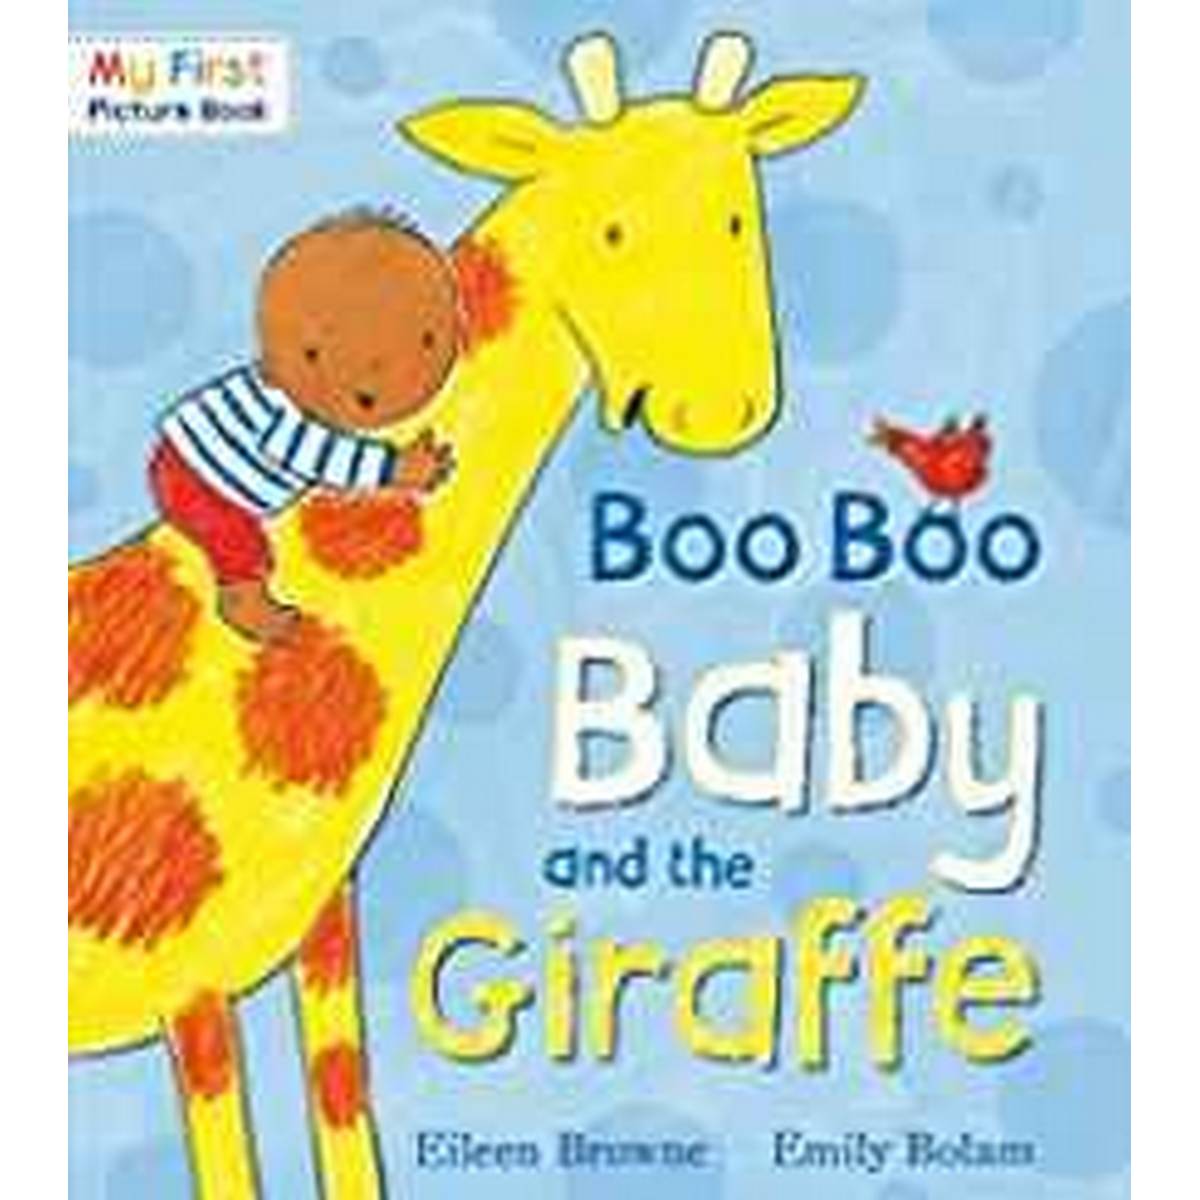 Boo Boo Baby and the Giraffe (My First Picture Book)